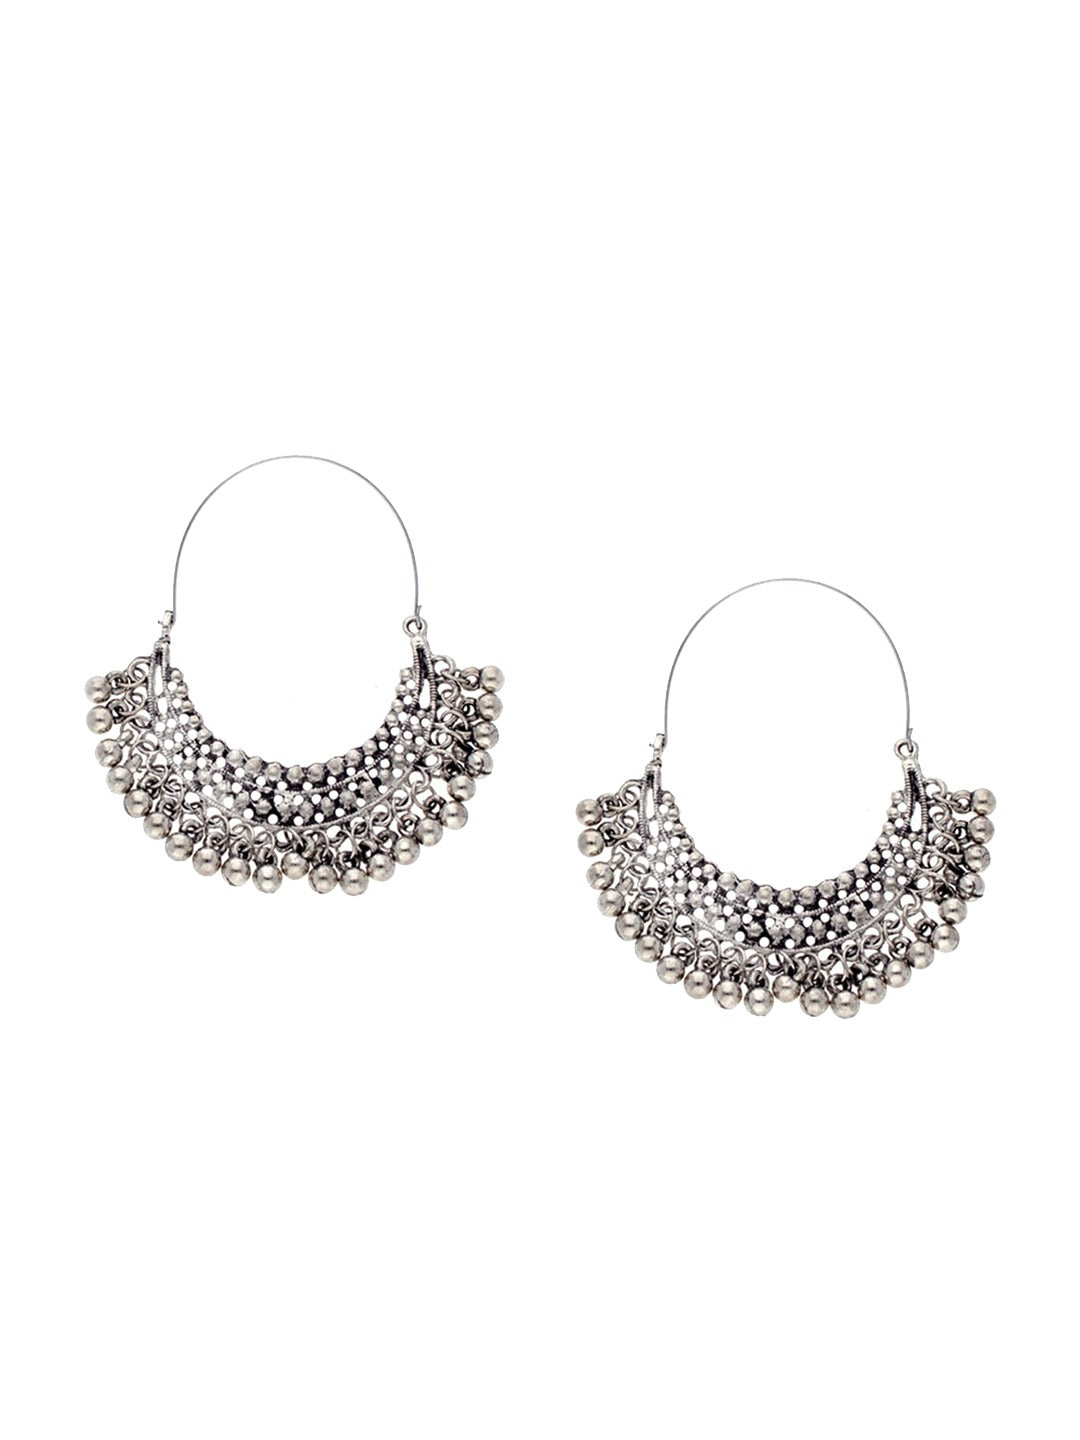 Women's Silver-Plated Oxidised Contemporary Hoop Earrings - Morkanth